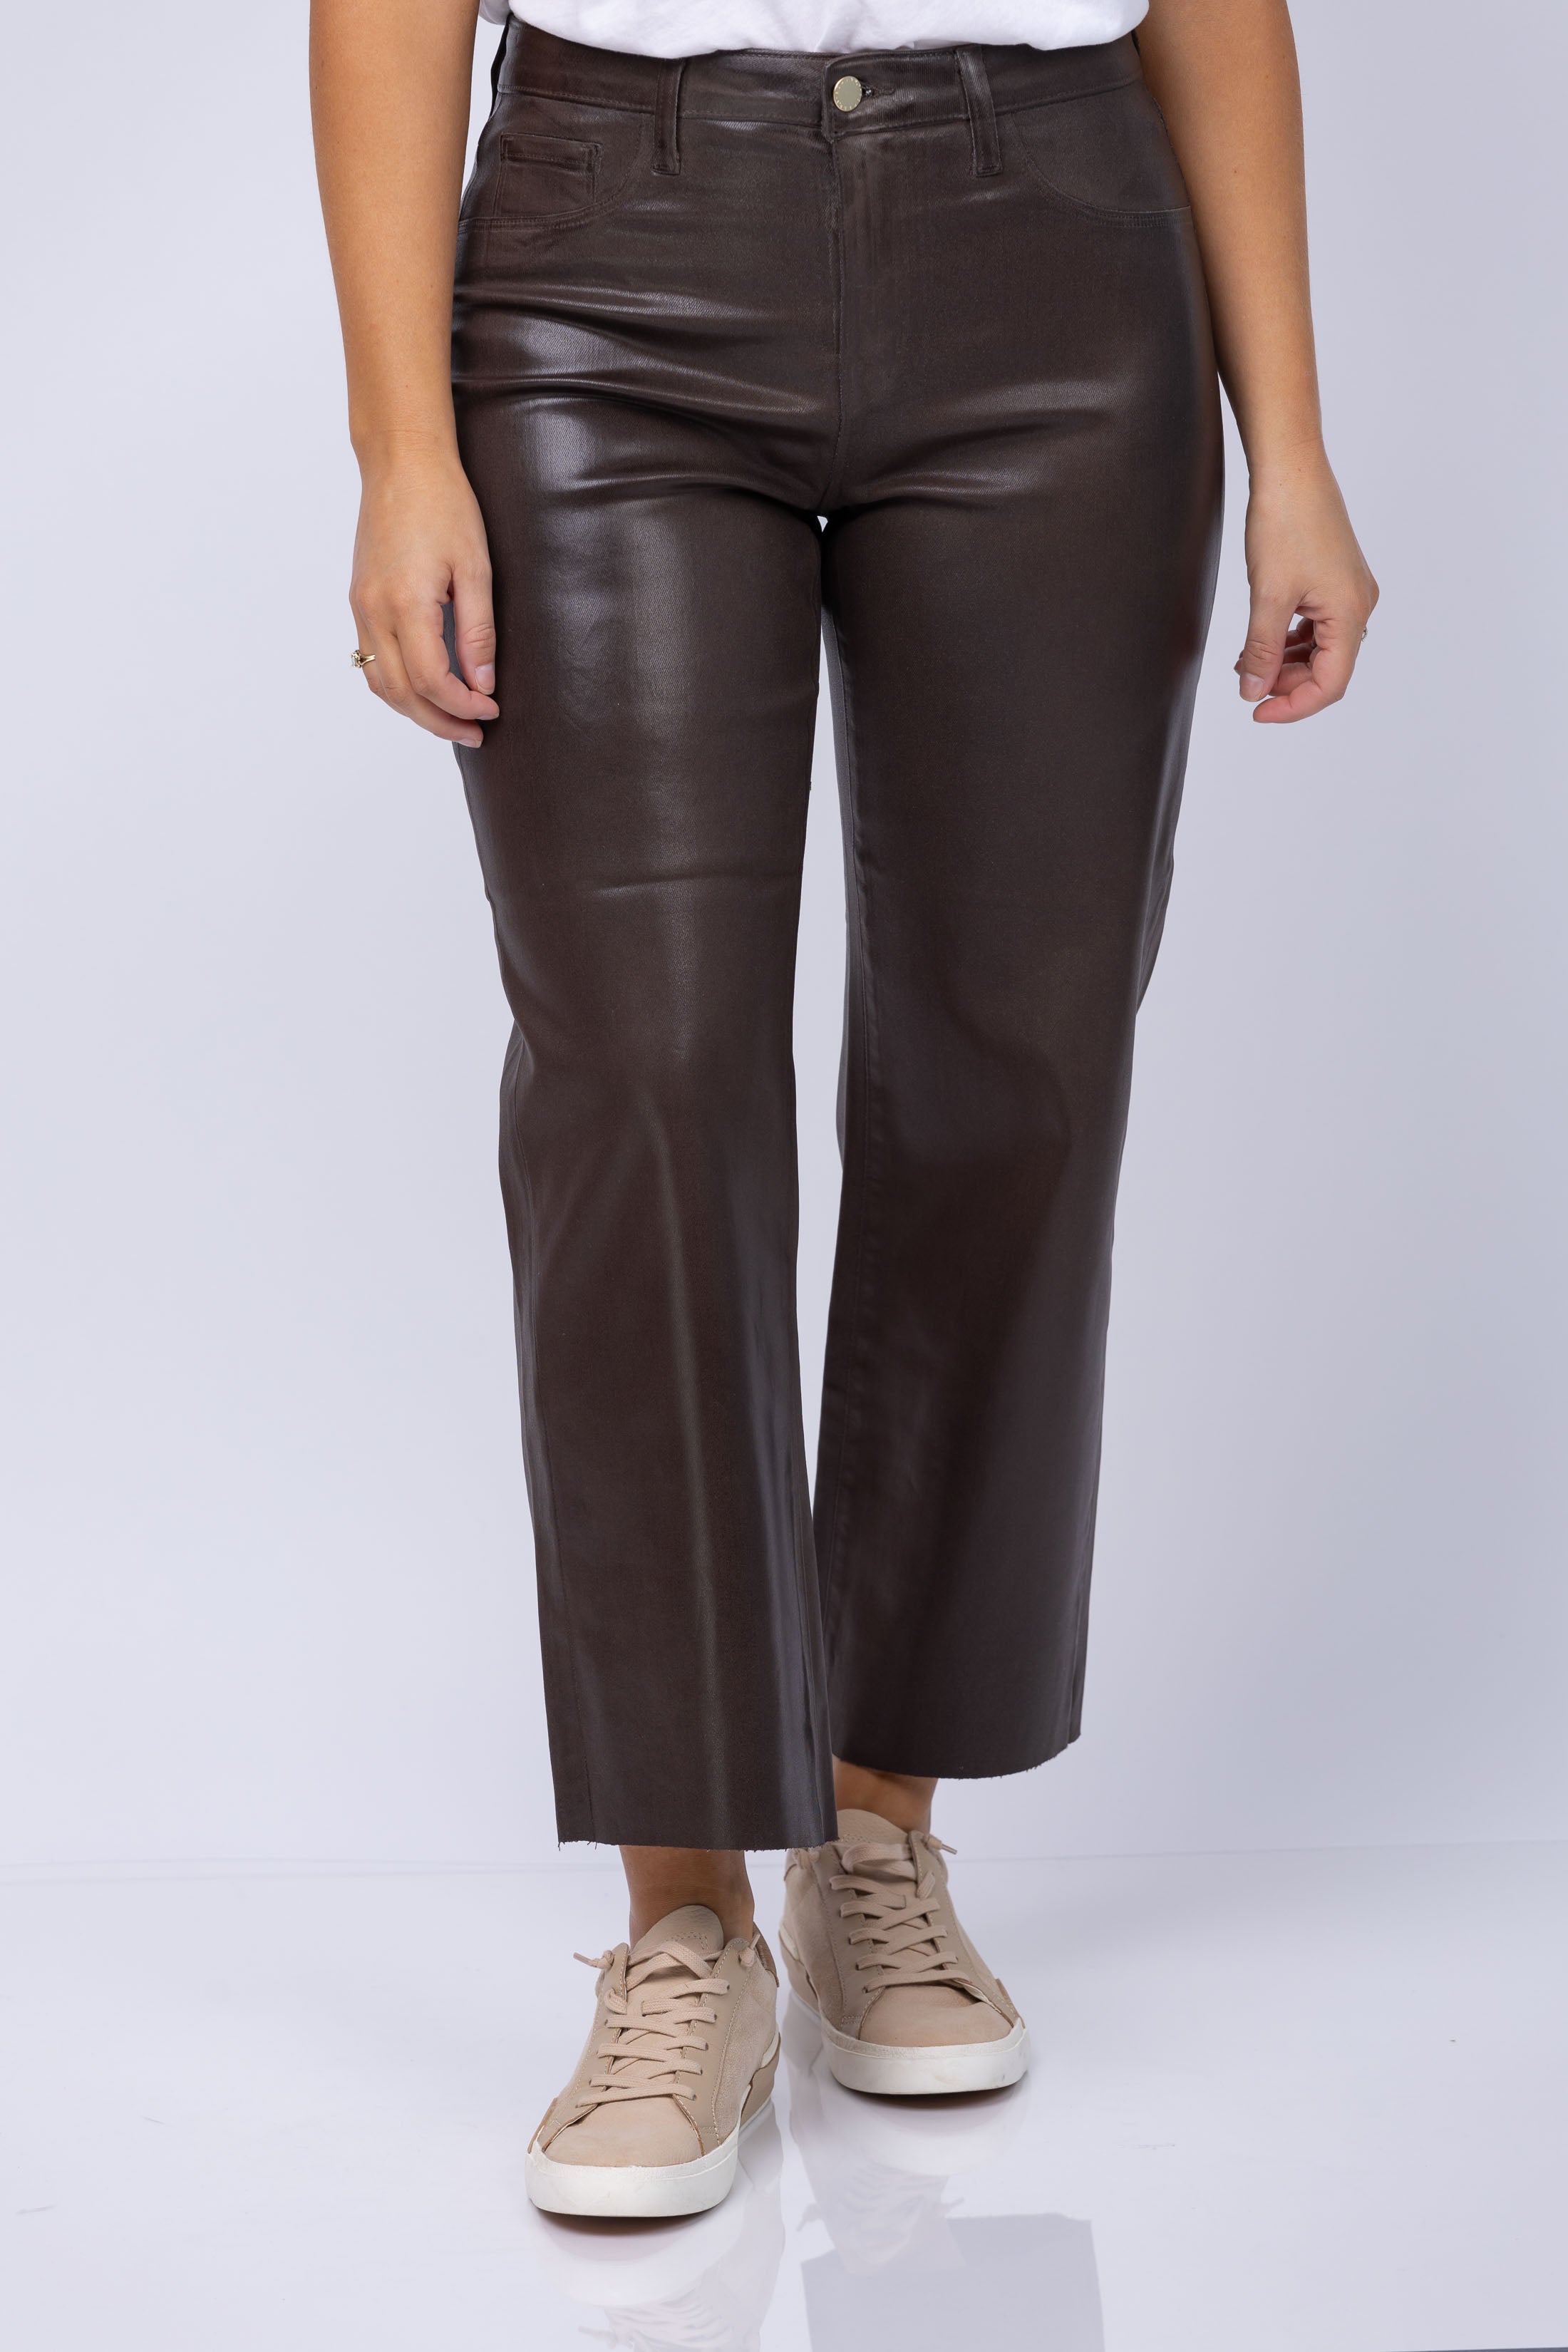 Hanie Vegan Leather Pant Silver – CAMI NYC